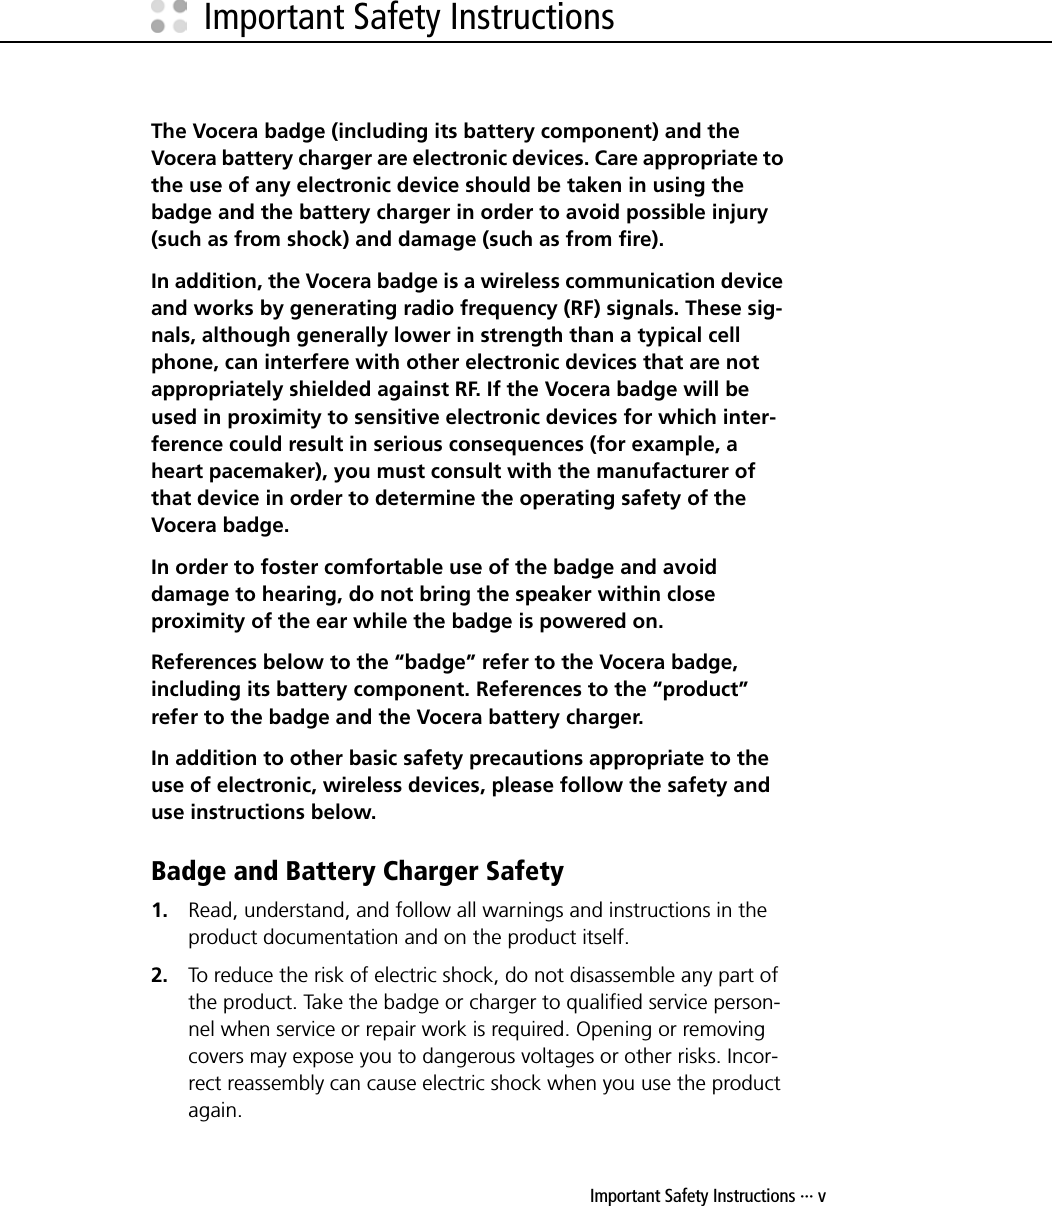 Important Safety Instructions ··· vImportant Safety InstructionsThe Vocera badge (including its battery component) and the Vocera battery charger are electronic devices. Care appropriate to the use of any electronic device should be taken in using the badge and the battery charger in order to avoid possible injury (such as from shock) and damage (such as from fire). In addition, the Vocera badge is a wireless communication device and works by generating radio frequency (RF) signals. These sig-nals, although generally lower in strength than a typical cell phone, can interfere with other electronic devices that are not appropriately shielded against RF. If the Vocera badge will be used in proximity to sensitive electronic devices for which inter-ference could result in serious consequences (for example, a heart pacemaker), you must consult with the manufacturer of that device in order to determine the operating safety of the Vocera badge.In order to foster comfortable use of the badge and avoid damage to hearing, do not bring the speaker within close proximity of the ear while the badge is powered on.References below to the “badge” refer to the Vocera badge, including its battery component. References to the “product” refer to the badge and the Vocera battery charger.In addition to other basic safety precautions appropriate to the use of electronic, wireless devices, please follow the safety and use instructions below.Badge and Battery Charger Safety1. Read, understand, and follow all warnings and instructions in the product documentation and on the product itself.2. To reduce the risk of electric shock, do not disassemble any part of the product. Take the badge or charger to qualified service person-nel when service or repair work is required. Opening or removing covers may expose you to dangerous voltages or other risks. Incor-rect reassembly can cause electric shock when you use the product again.